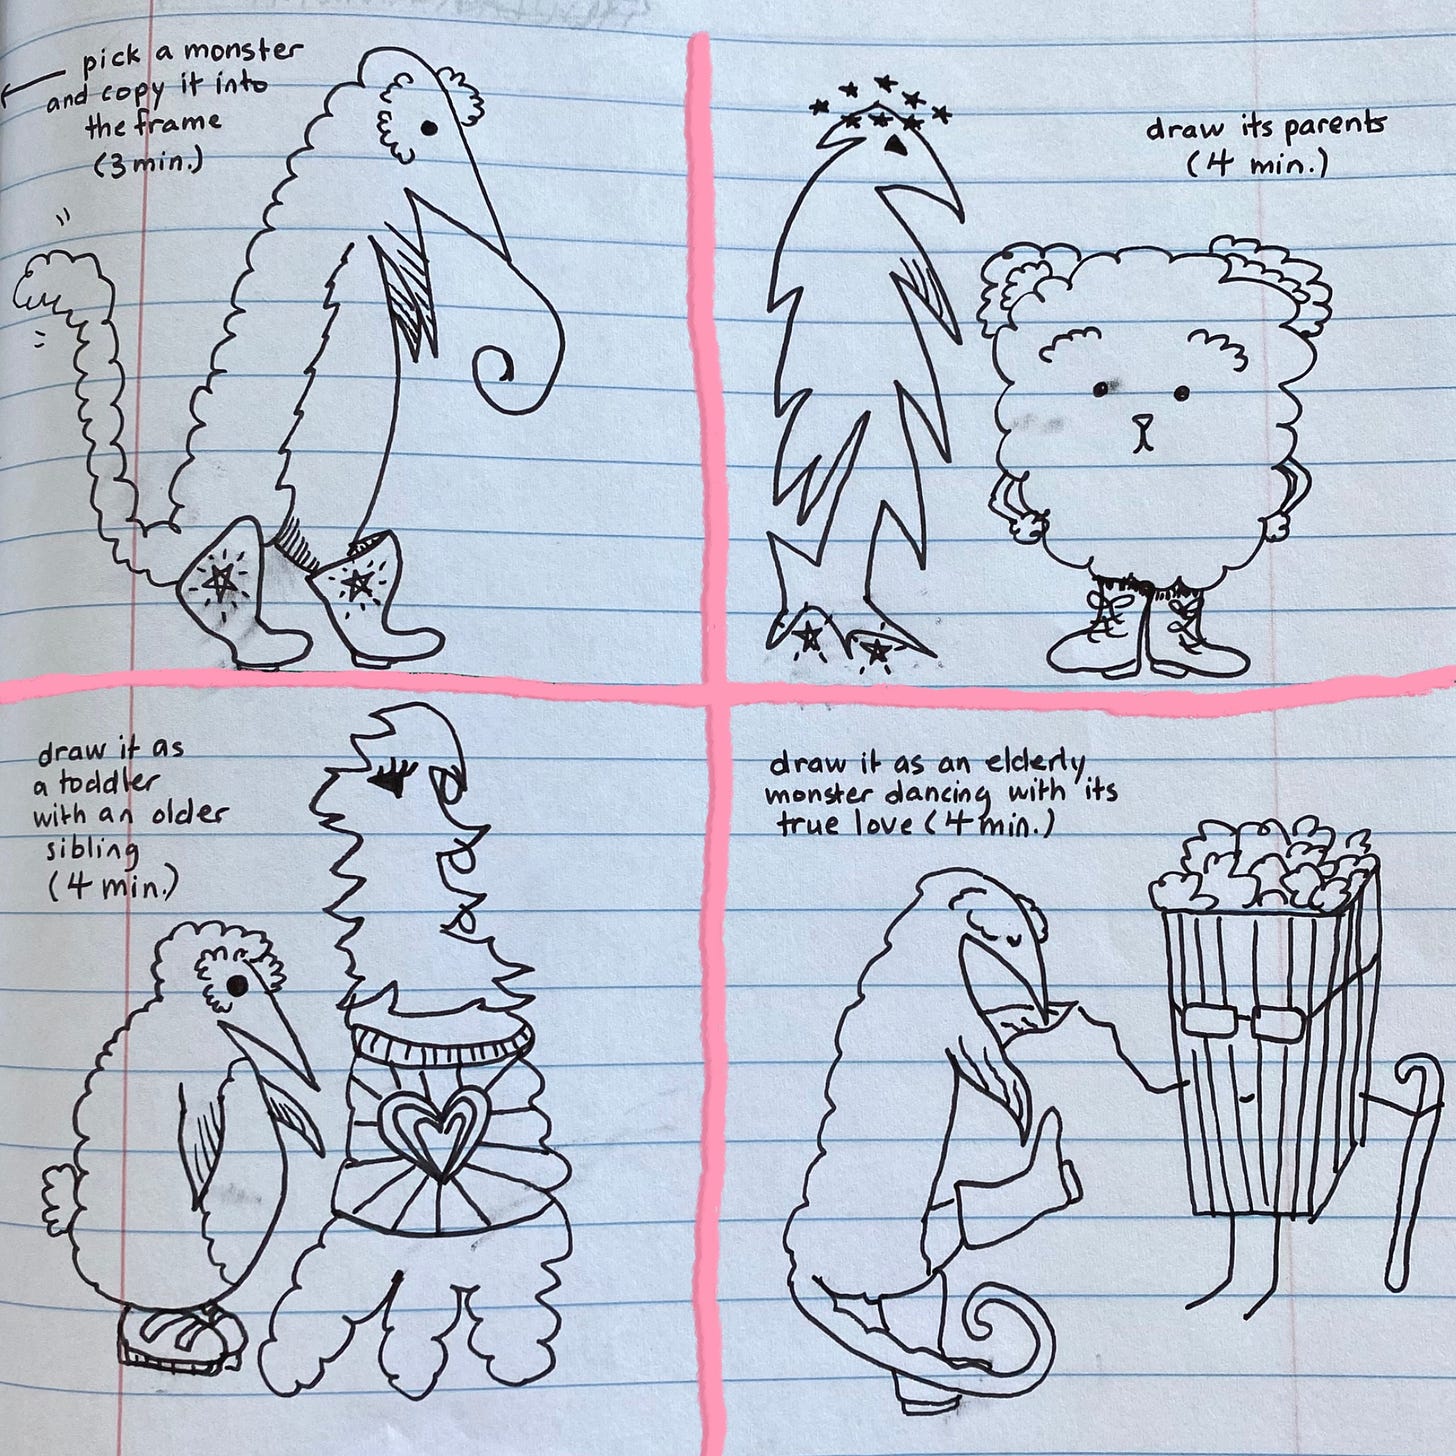 A four-panel ink cartoon on notebook paper featuring a soft-looking monster with a pointy nose, a long tail, and cowboy boots with stars on them. The first panel just shows the monster. The second panel shows its parents—a spiky, lightning-shaped creature with stars around its head and a fluffy creature with kind eyes. The third panel shows the monster as a toddler, plump and ineffectual as a baby penguin, and beside them their older sibling, a spiky monster wearing a cute sweater and many earrings. In the final panel, the monster, now elderly and grateful, is dancing with the love of its life, an old box of popcorn. The popcorn box is wearing glasses and using a cane.